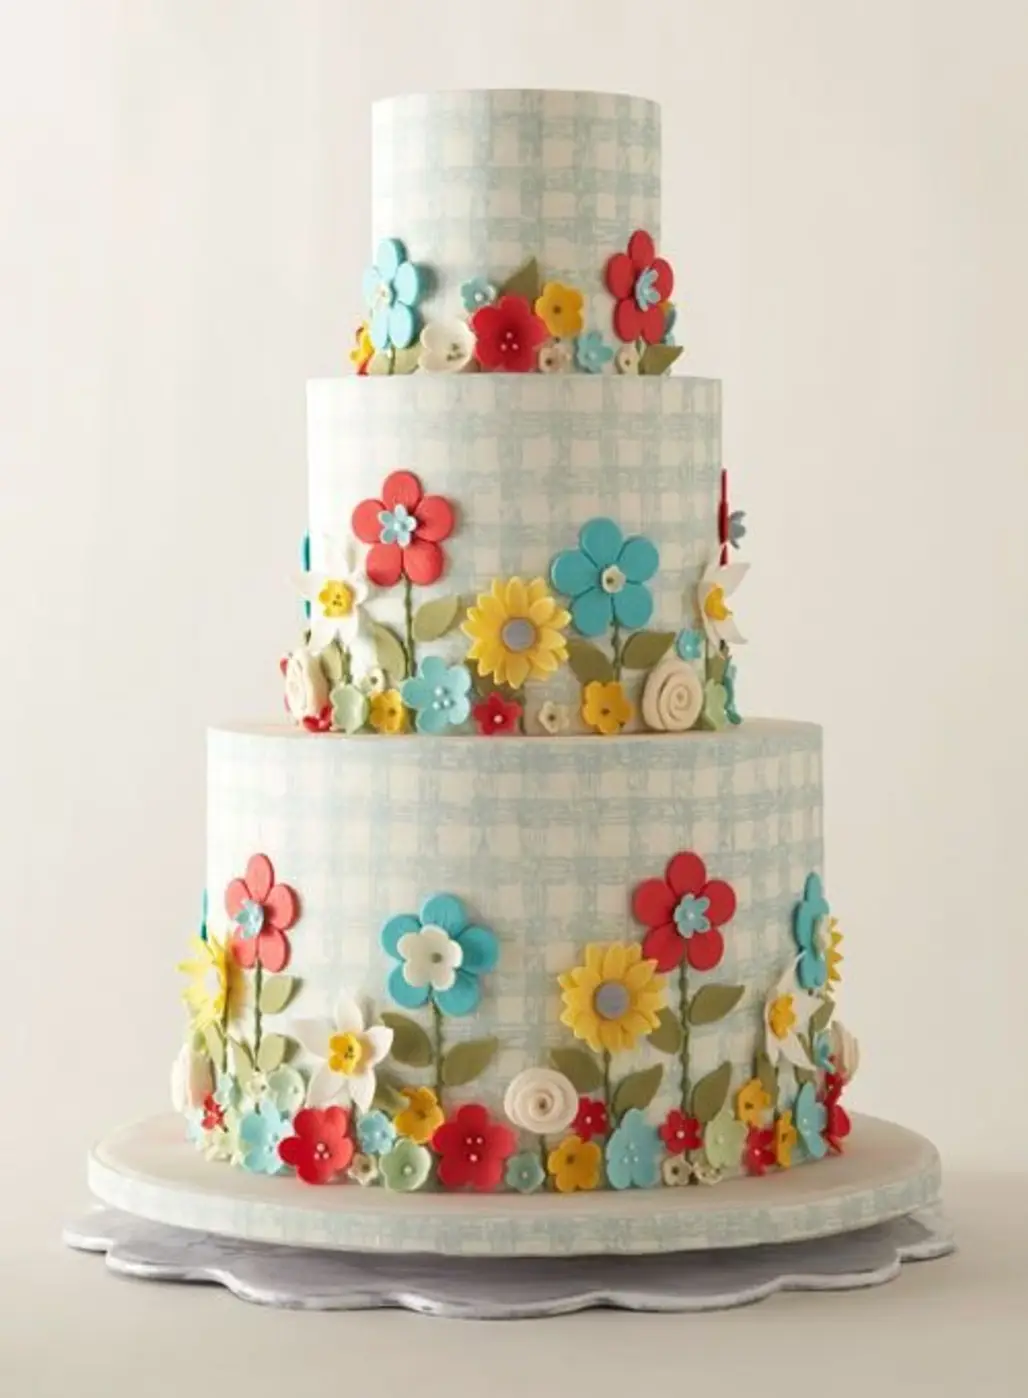 Checkered Pattern and Colorful Floral Border